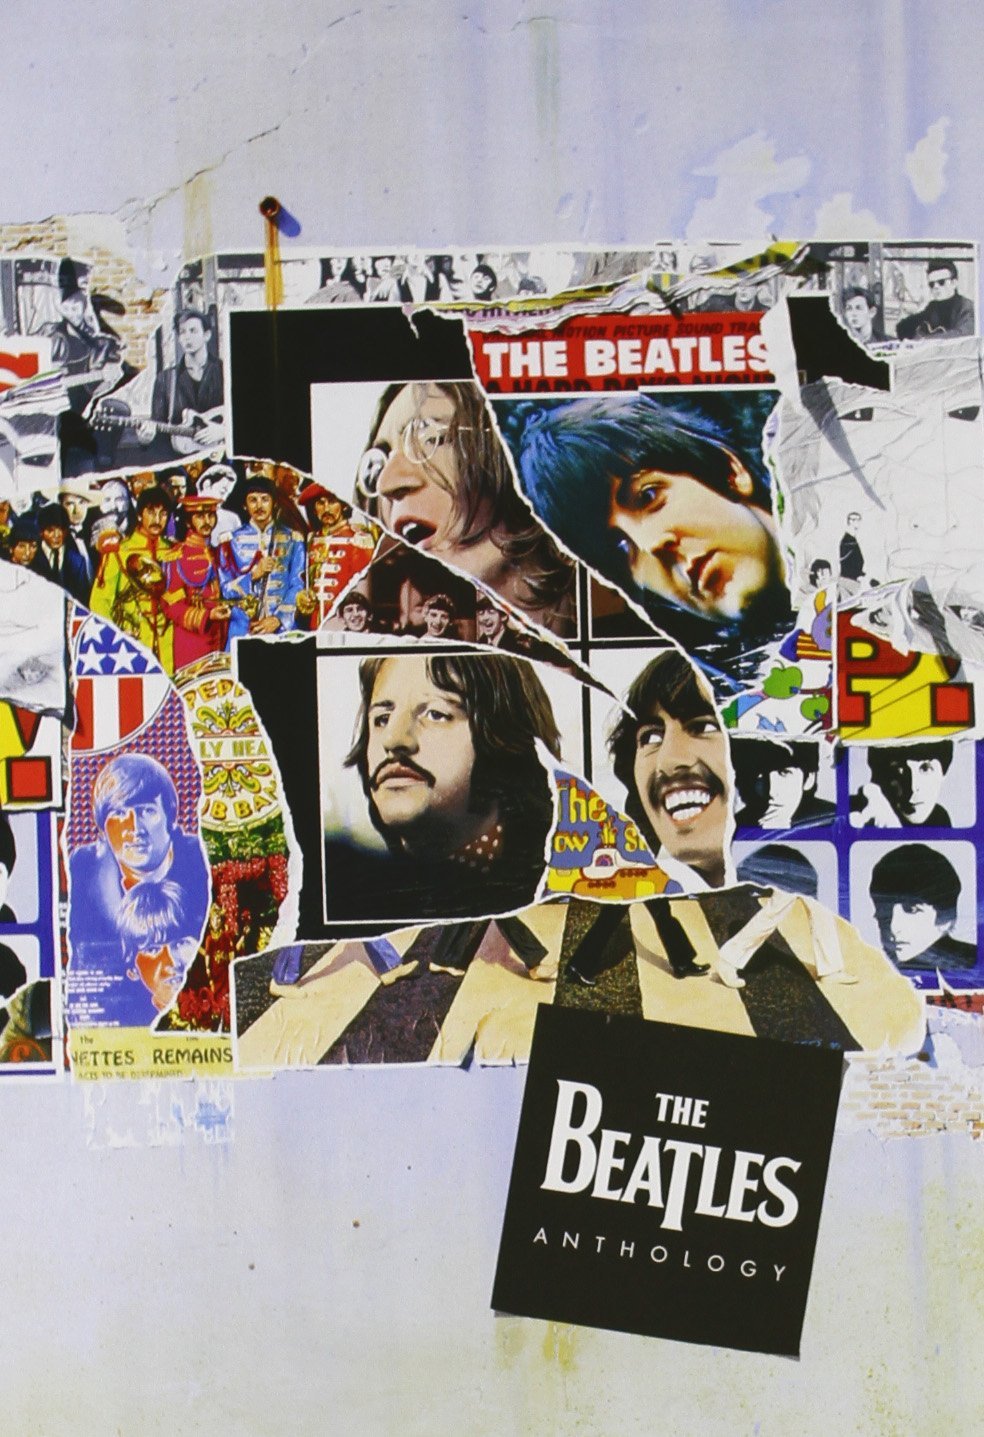 The Beatles Anthology – The Definitive Documentary on the Fab Four!